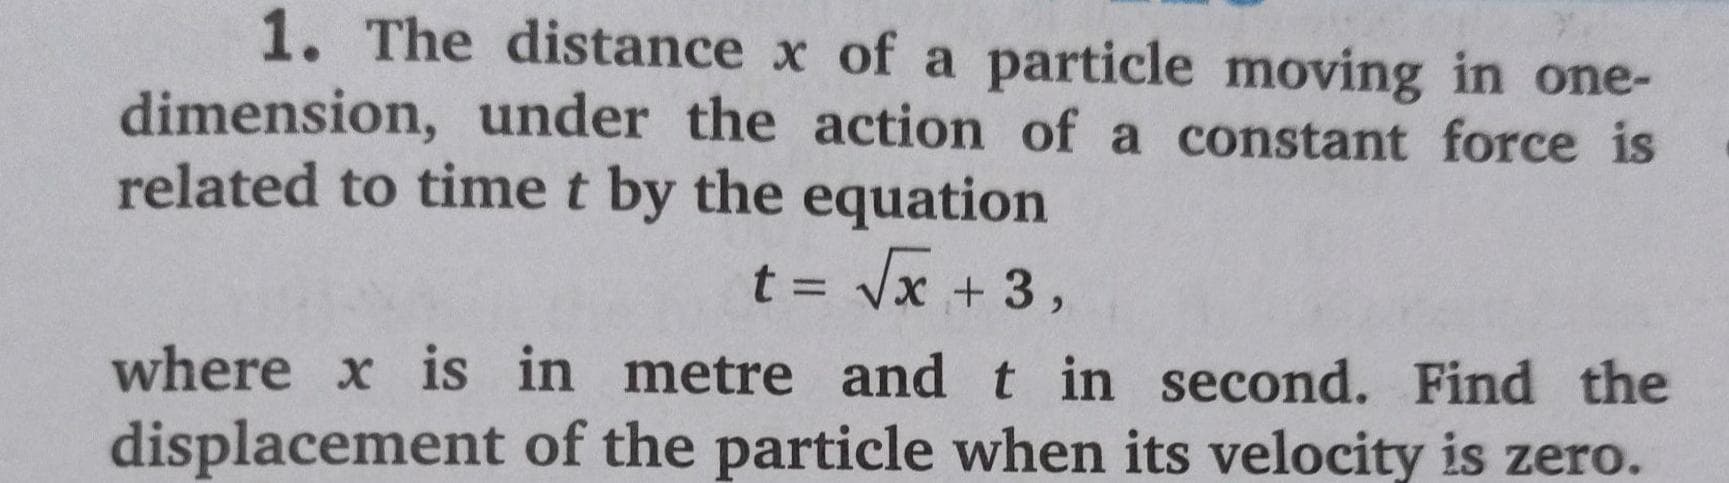 1. The distance x of a particle moving in one-
dimension, under the action of a constant force is
related to time t by the equation
t = Vx + 3,
where x is in metre and t in second. Find the
displacement of the particle when its velocity is zero.
